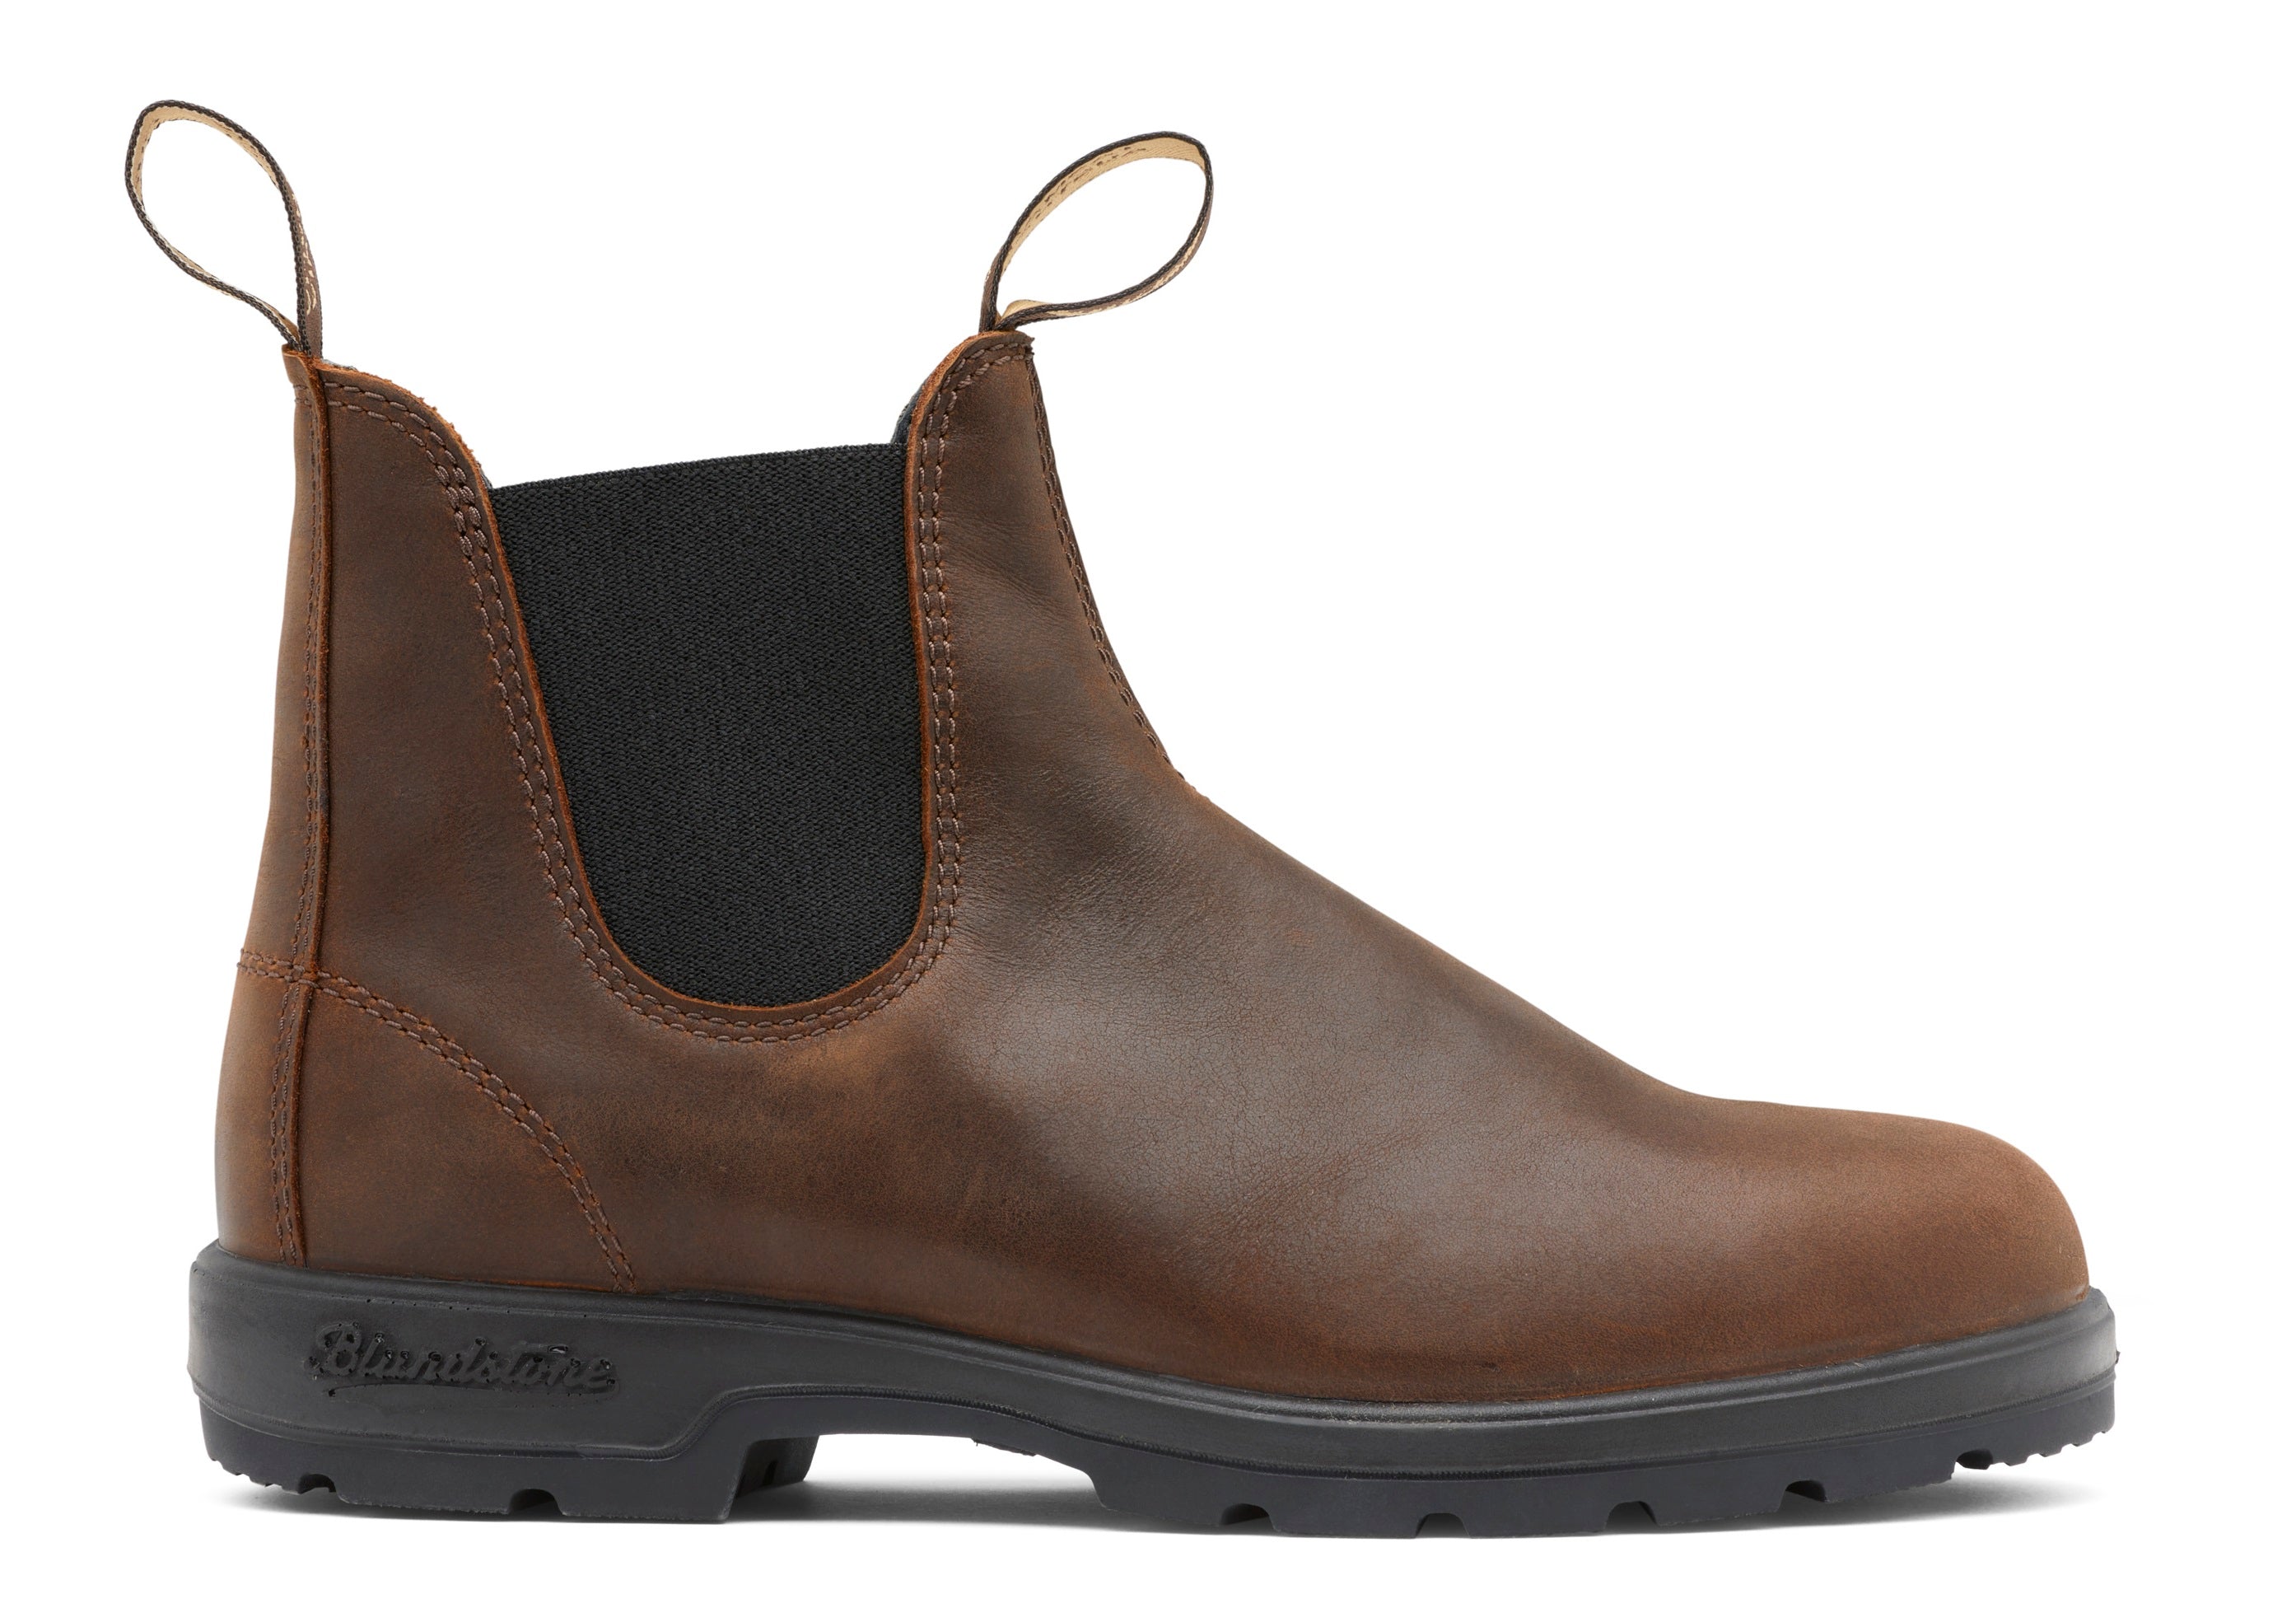 blundstone classic boot round toe 1609 antique brown side